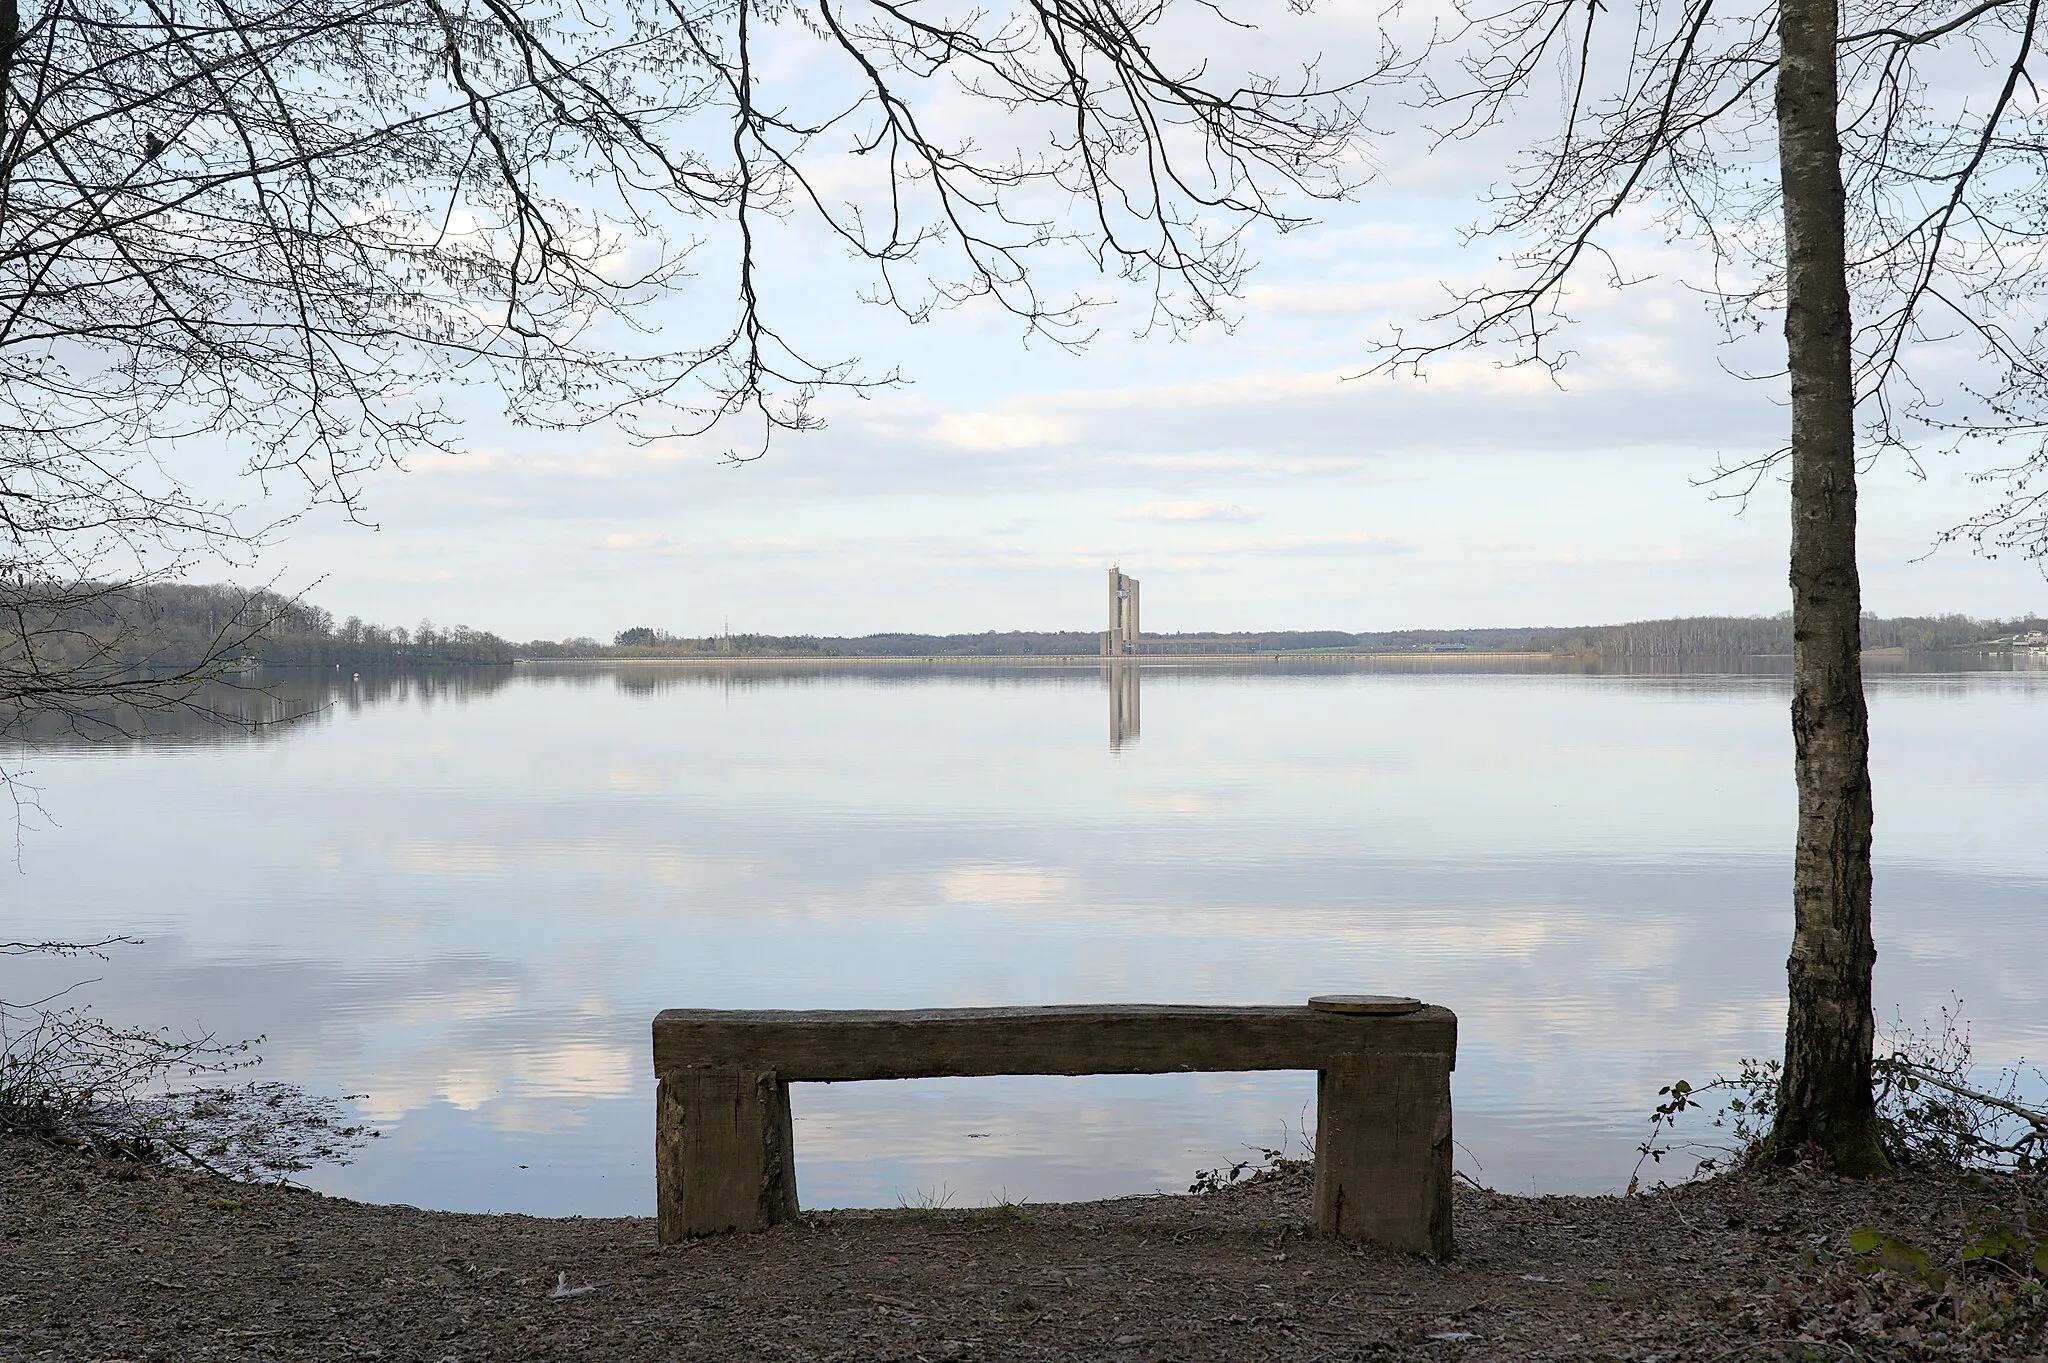 Photo showing: Lac de l'Eau d'Heure with Barrage de la Plate Taille visible in the background and a bench in the foreground (Froidchapelle, Belgium)